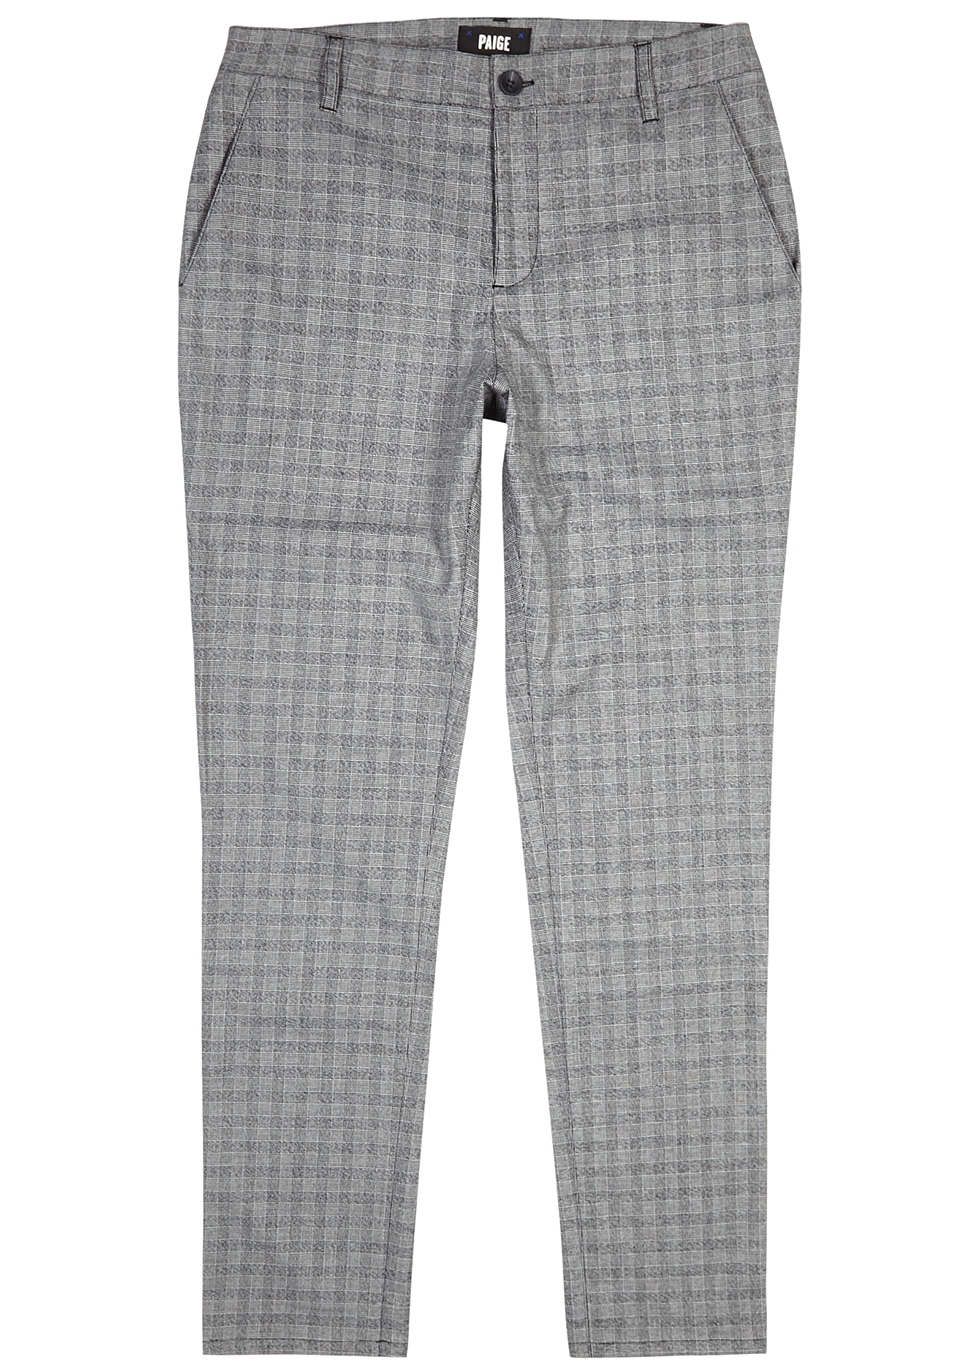 paige stafford trouser